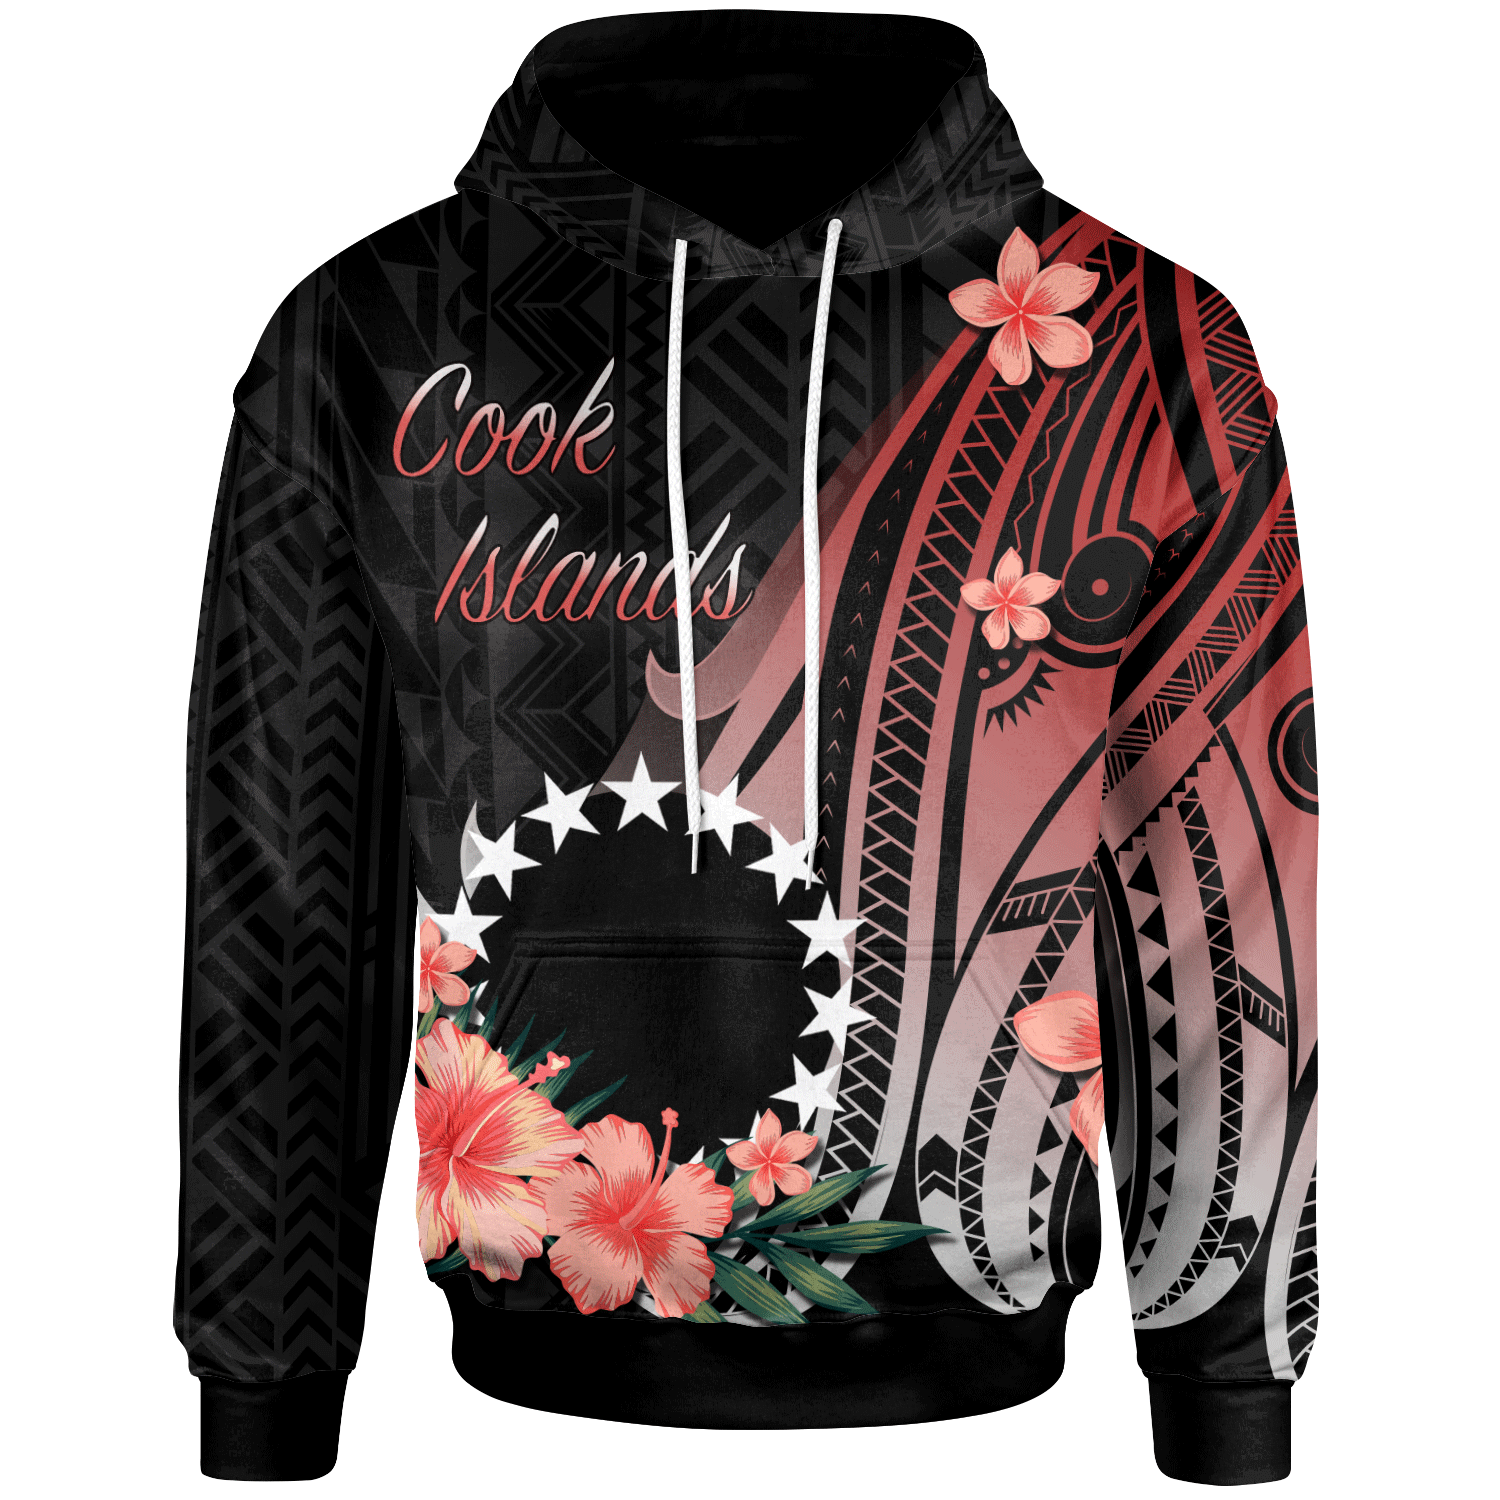 Cook Islands Hoodie Red Polynesian Hibiscus Pattern Style Unisex Red - Polynesian Pride